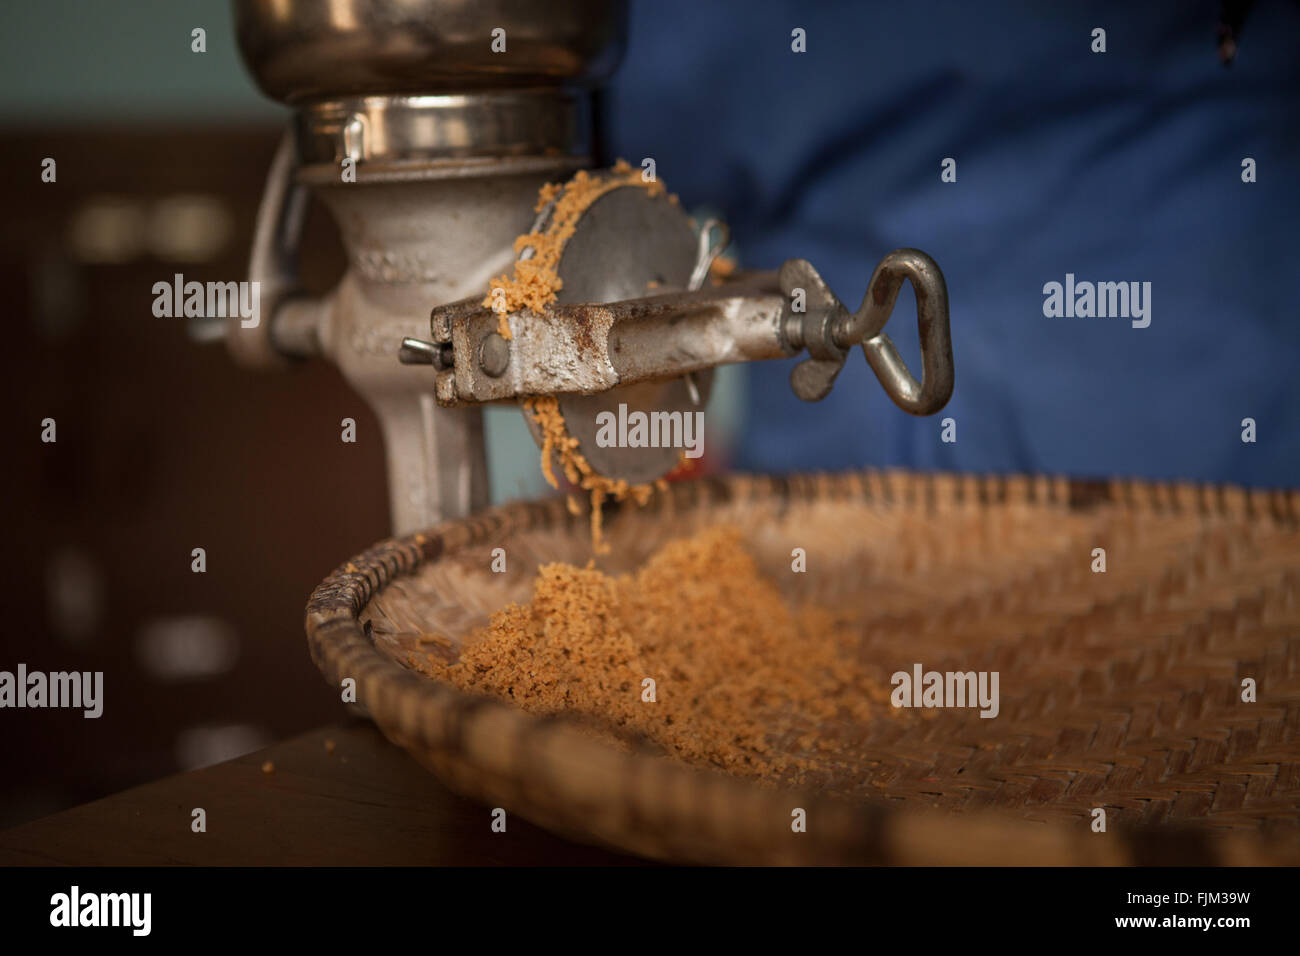 A business woman grinding peanuts to sell, Tanzania Stock Photo